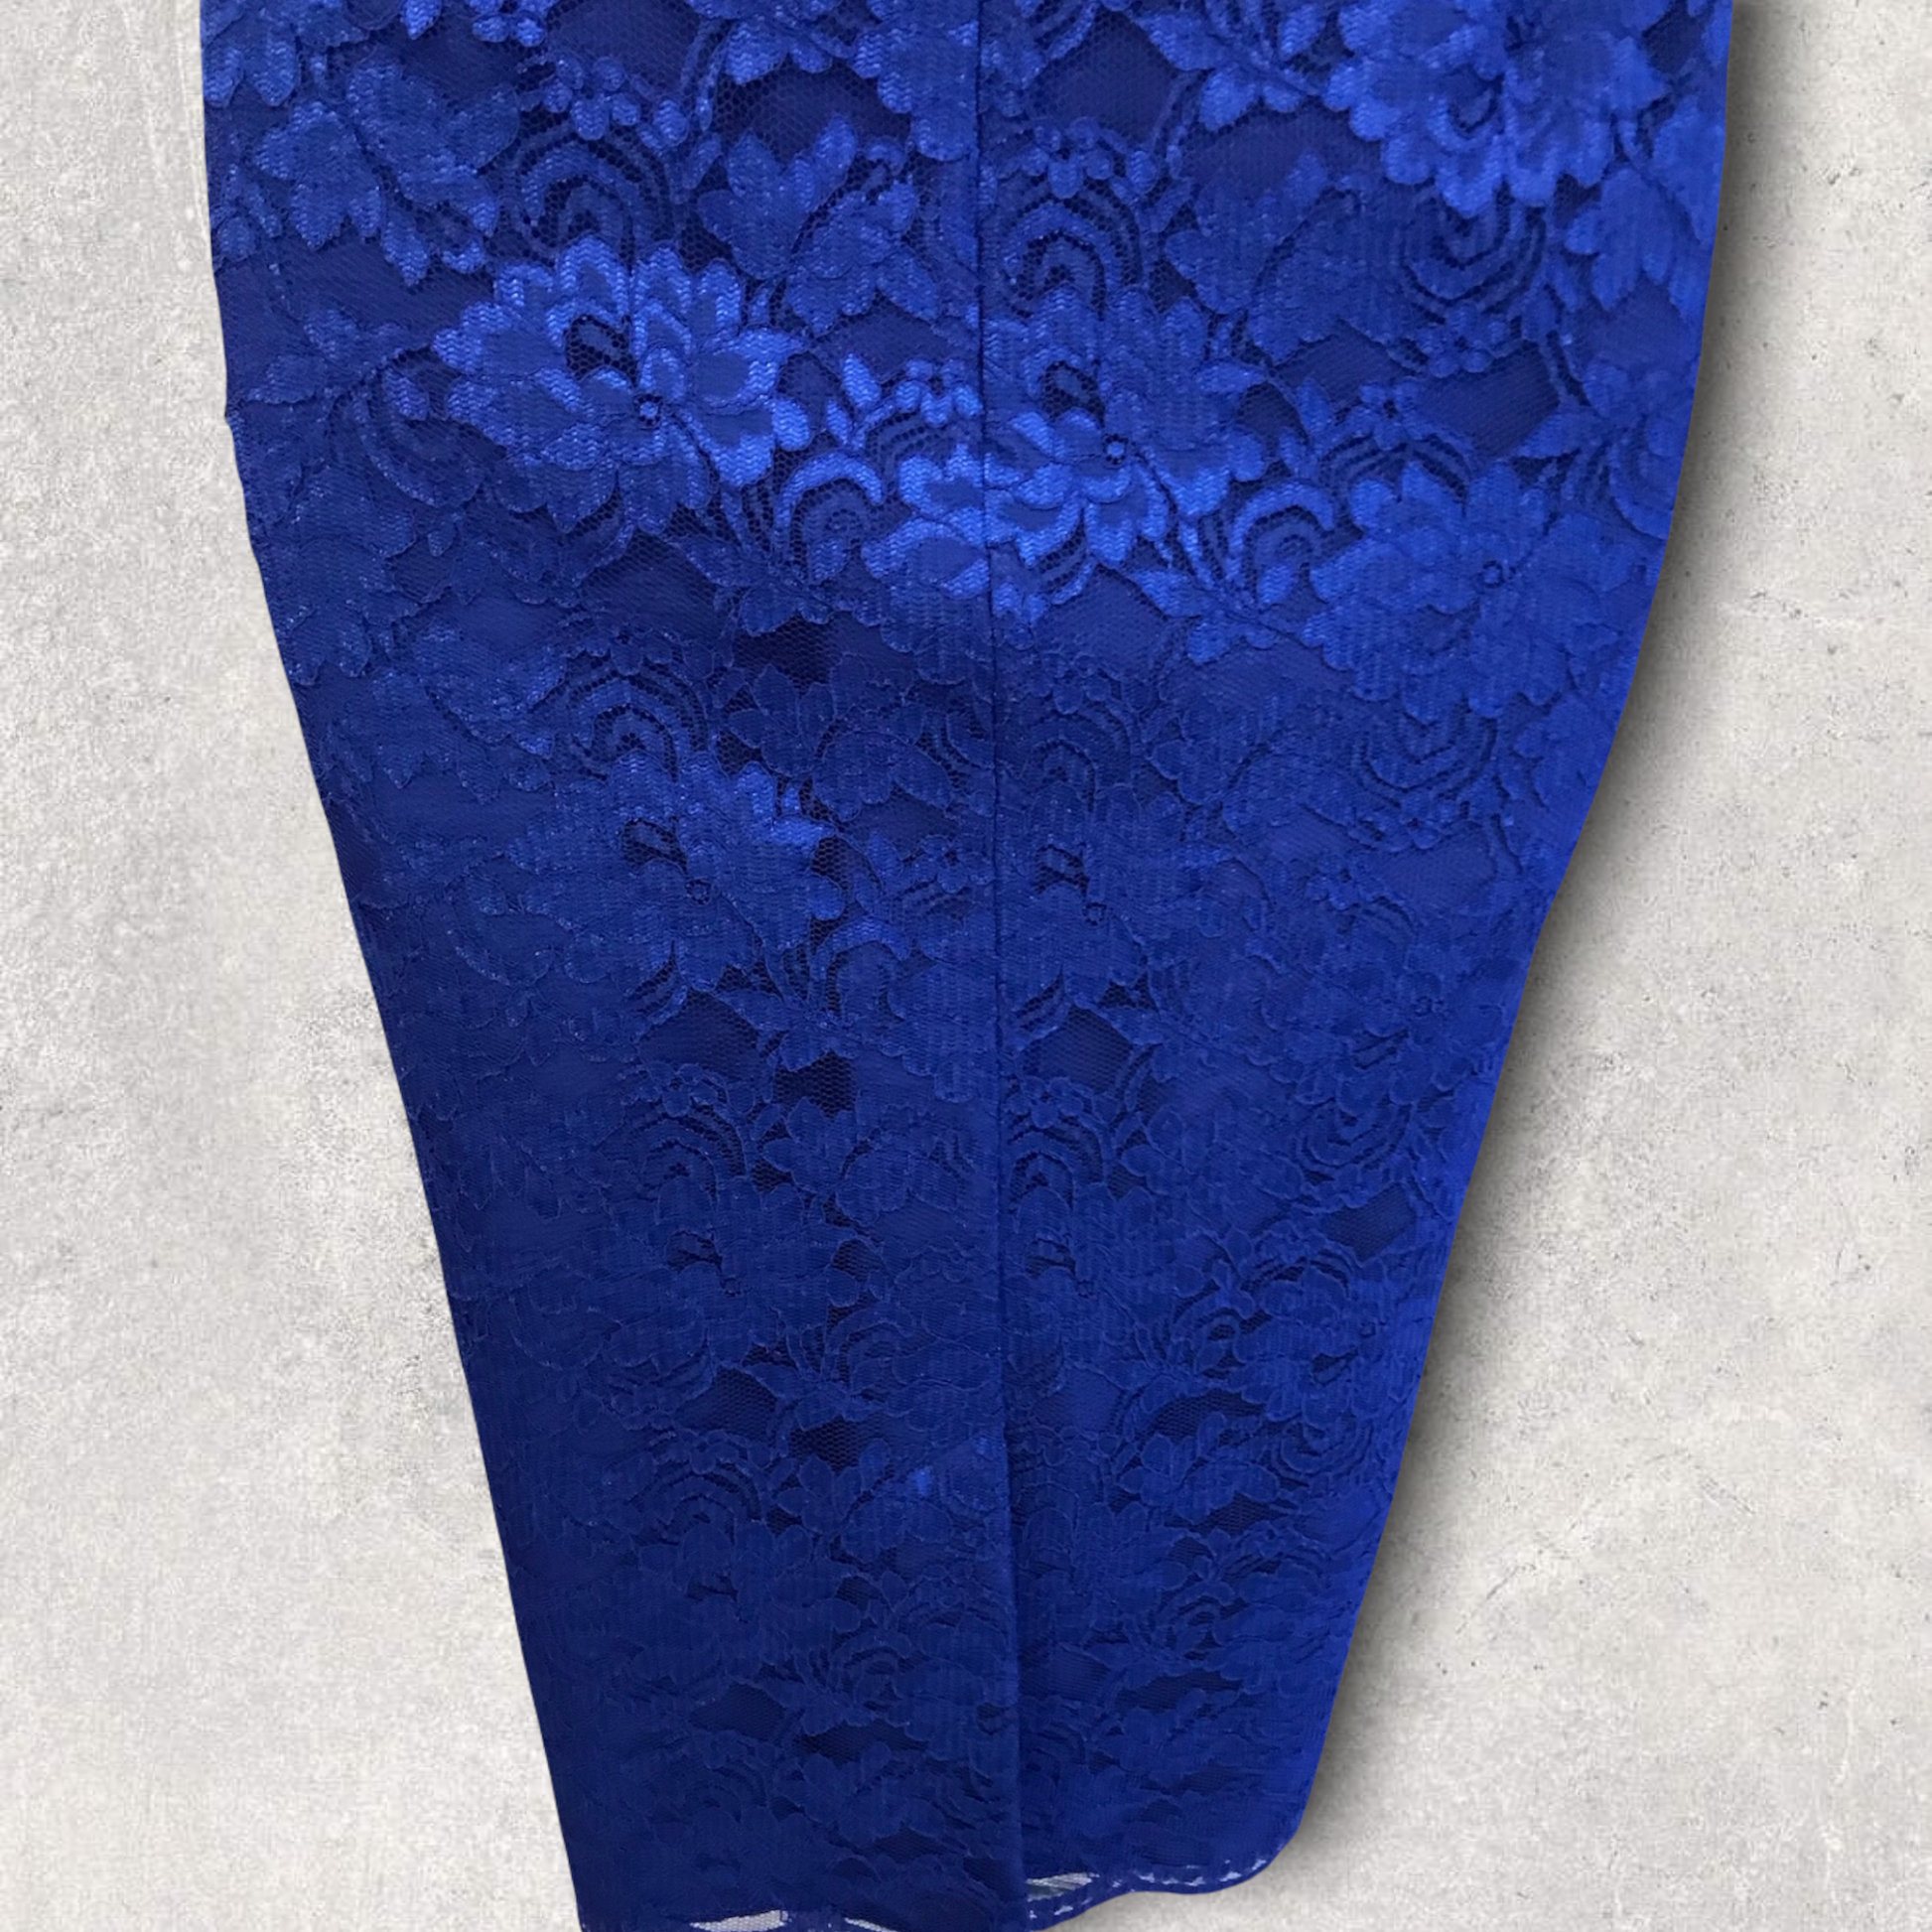 Michaela Louisa Royal Blue Lace Special Occasion Outfit UK 10 US 6 EU 38 BNWT RRP £225 Timeless Fashions